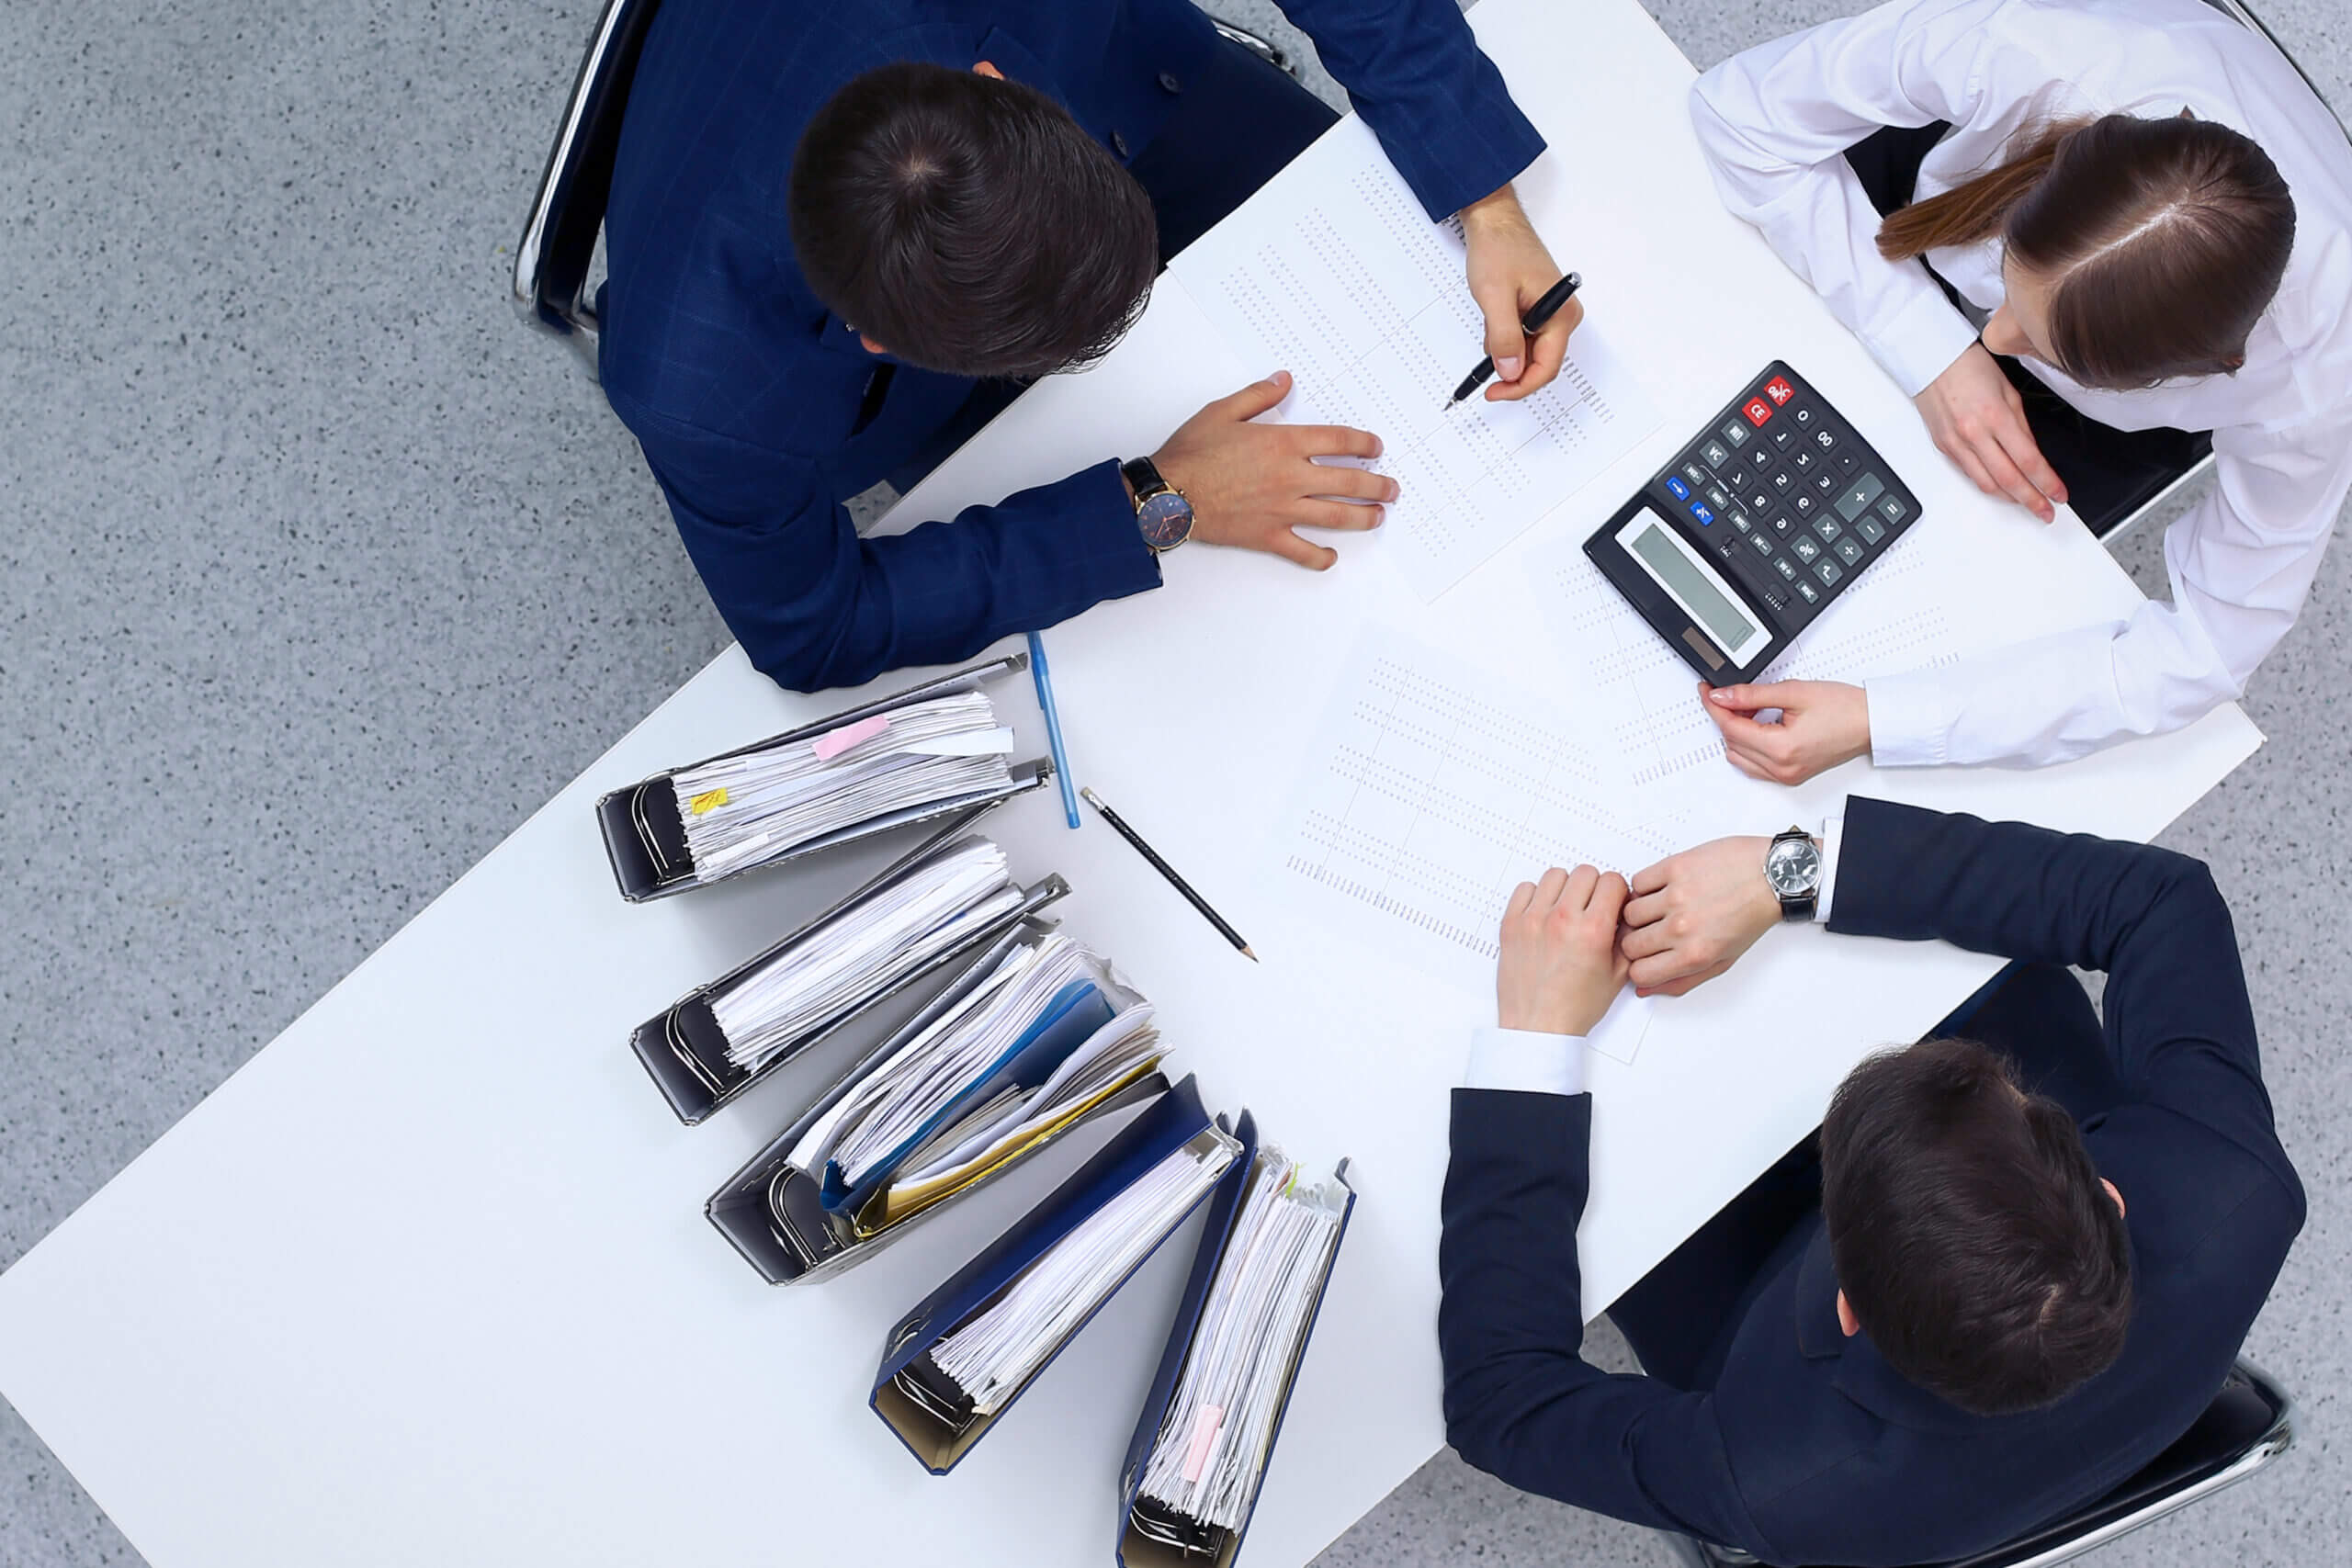 Business people at meeting, view from above. Bookkeeper or financial inspector making report, calculating or checking balance. Internal Revenue Service checking financial document. Audit and tax concept.